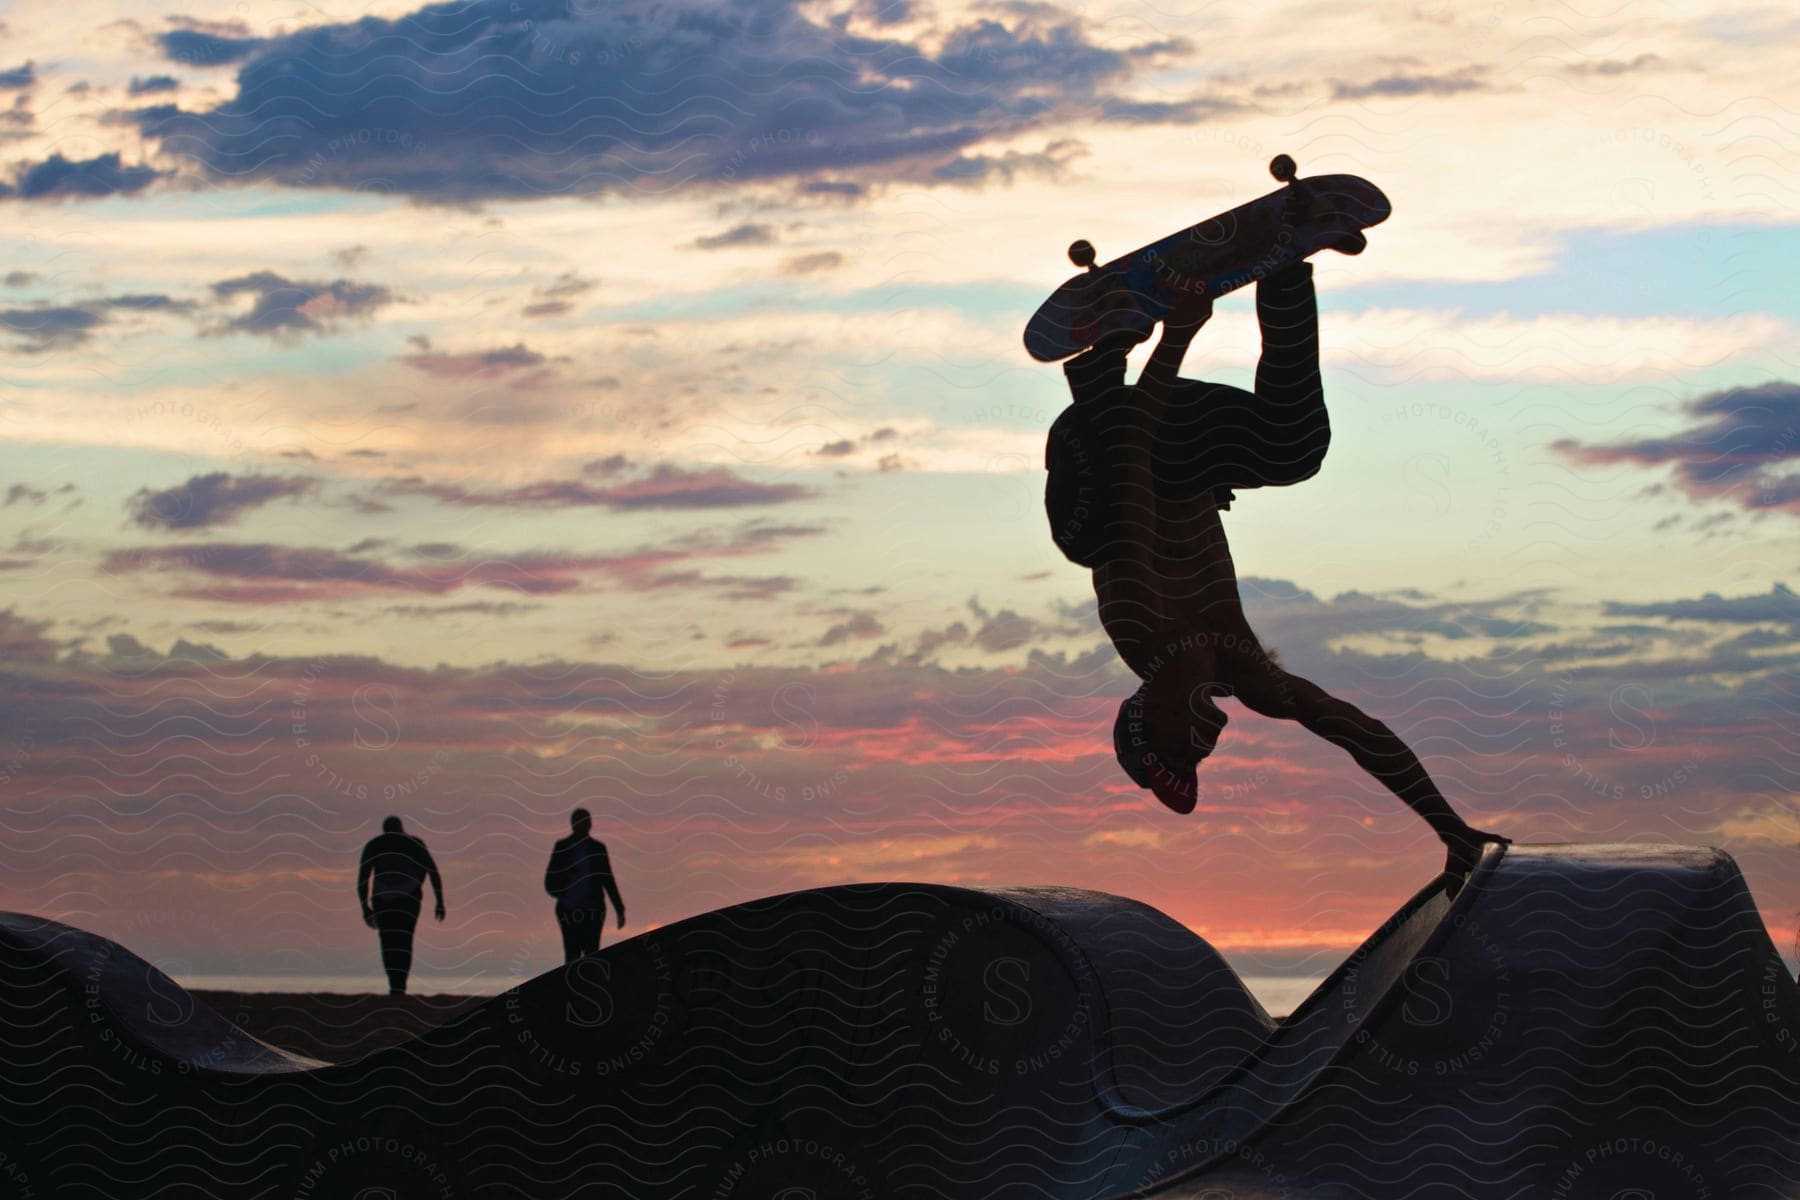 A young man performing a skateboarding trick on a skate park during sunset